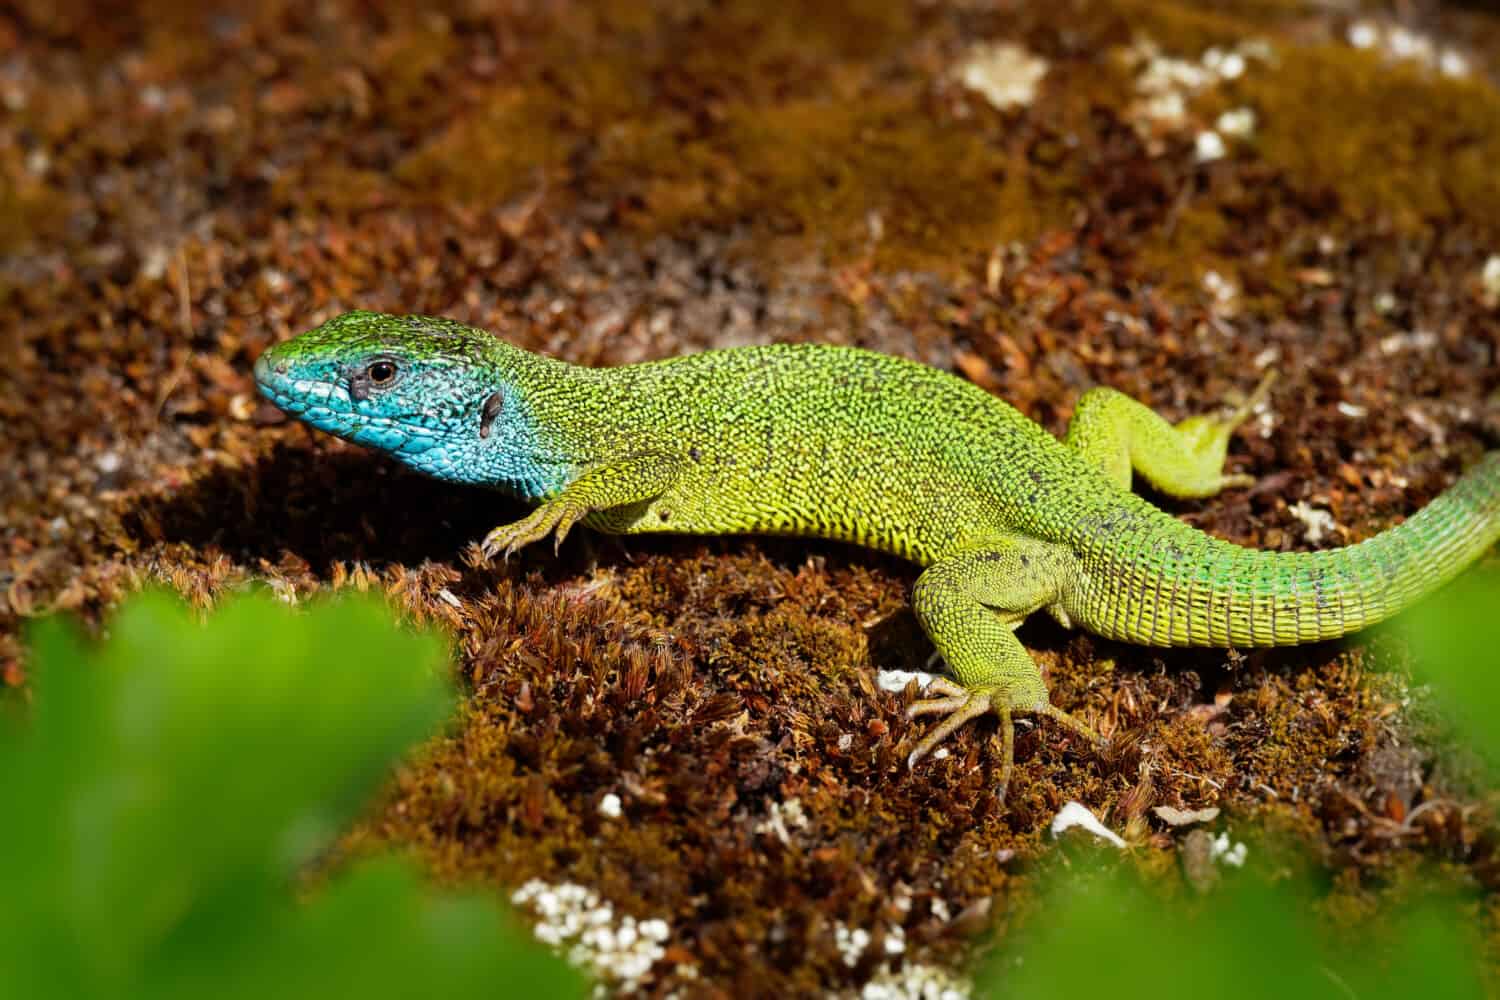 European Green Lizard - Lacerta viridis - large green and blue lizard distributed across European midlatitudes, male with the tick (harvest-mite) on the body. Often seen sunning on rocks or lawns.